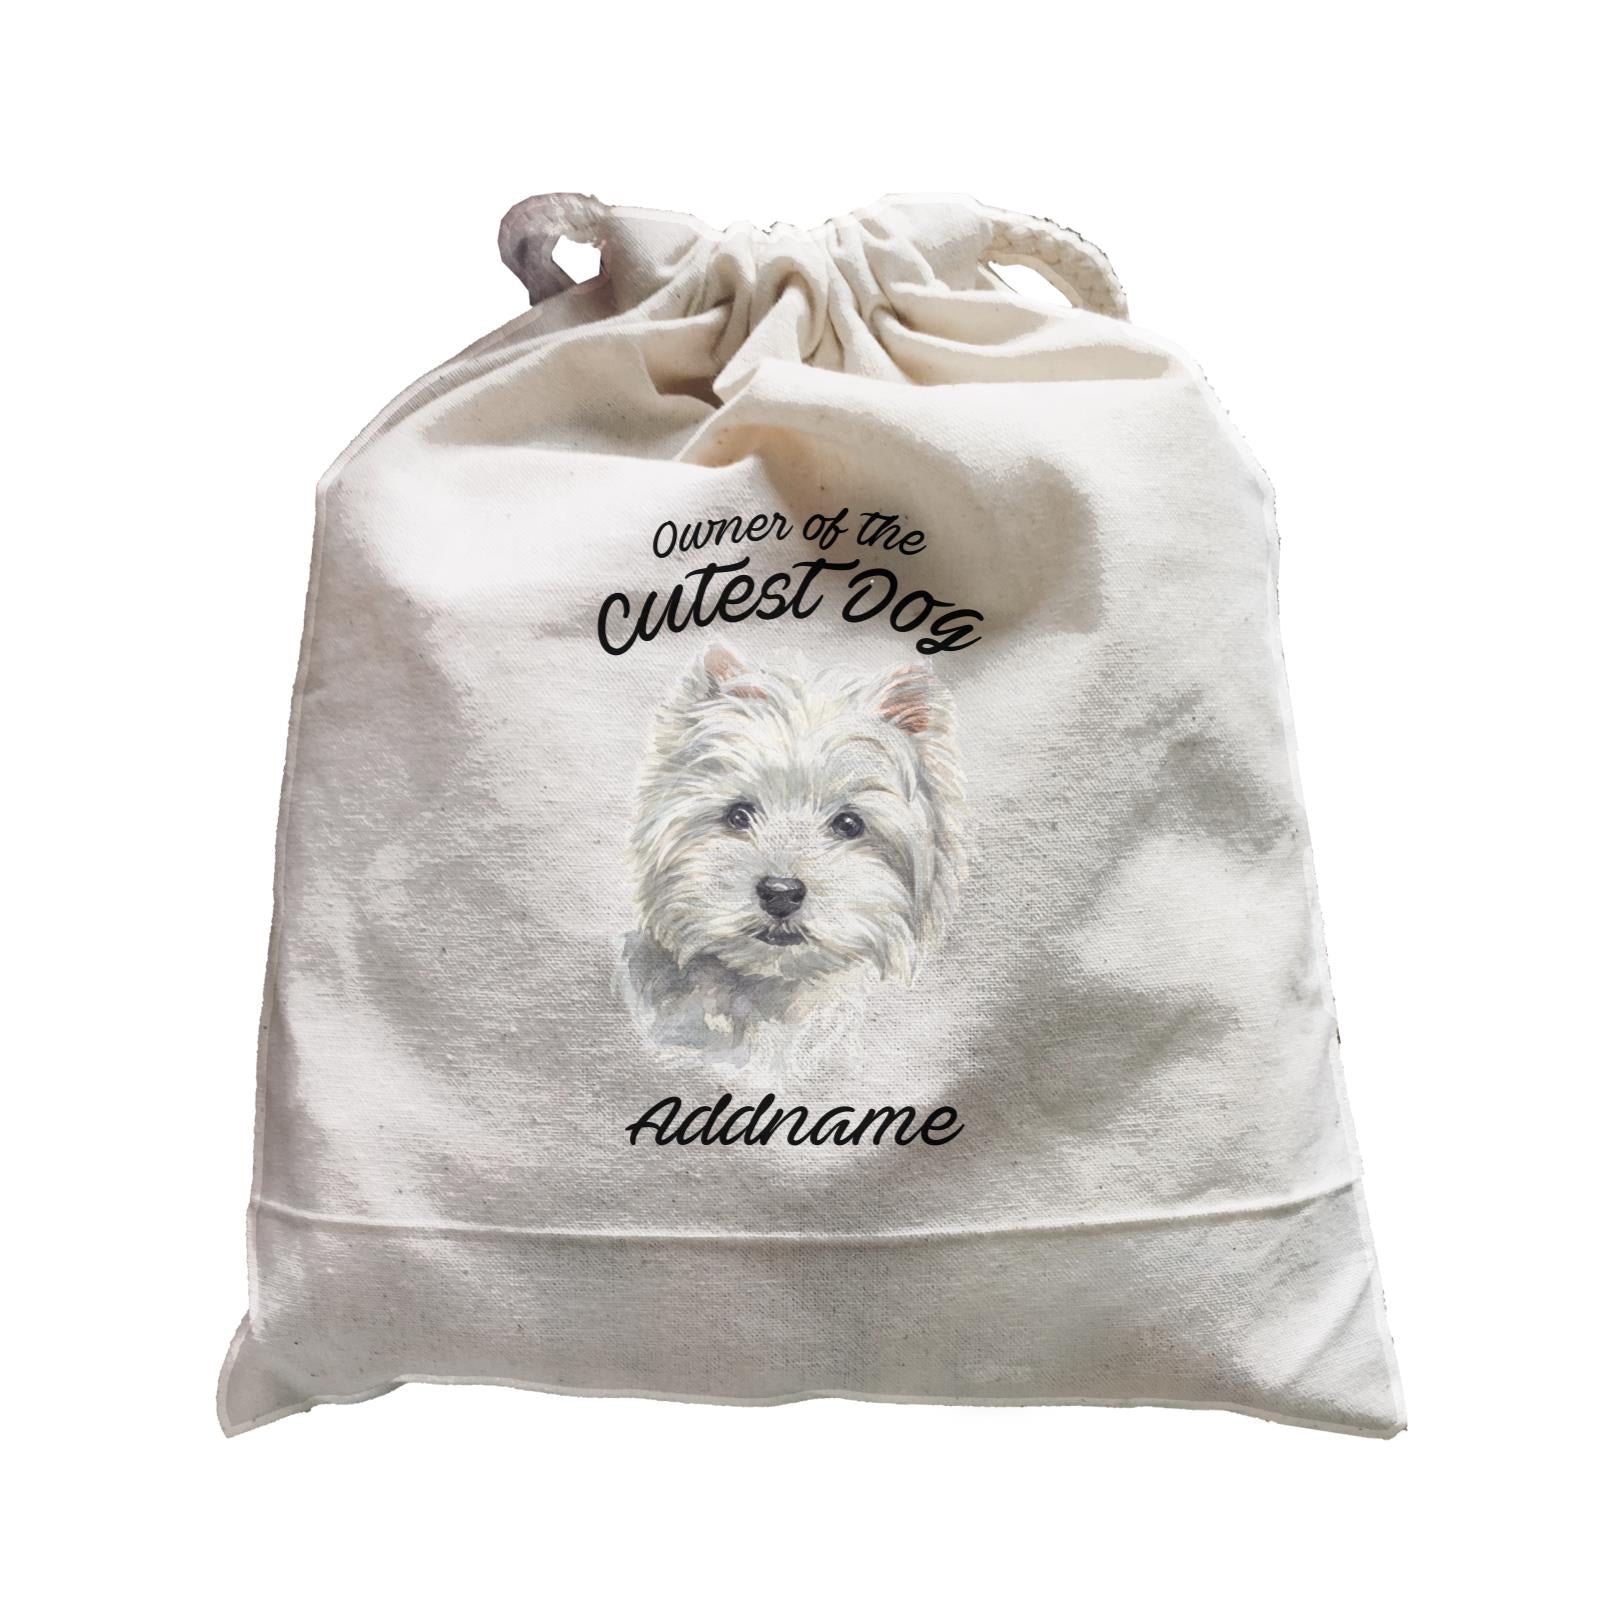 Watercolor Dog Owner Of The Cutest Dog West Highland White Terrier Addname Satchel